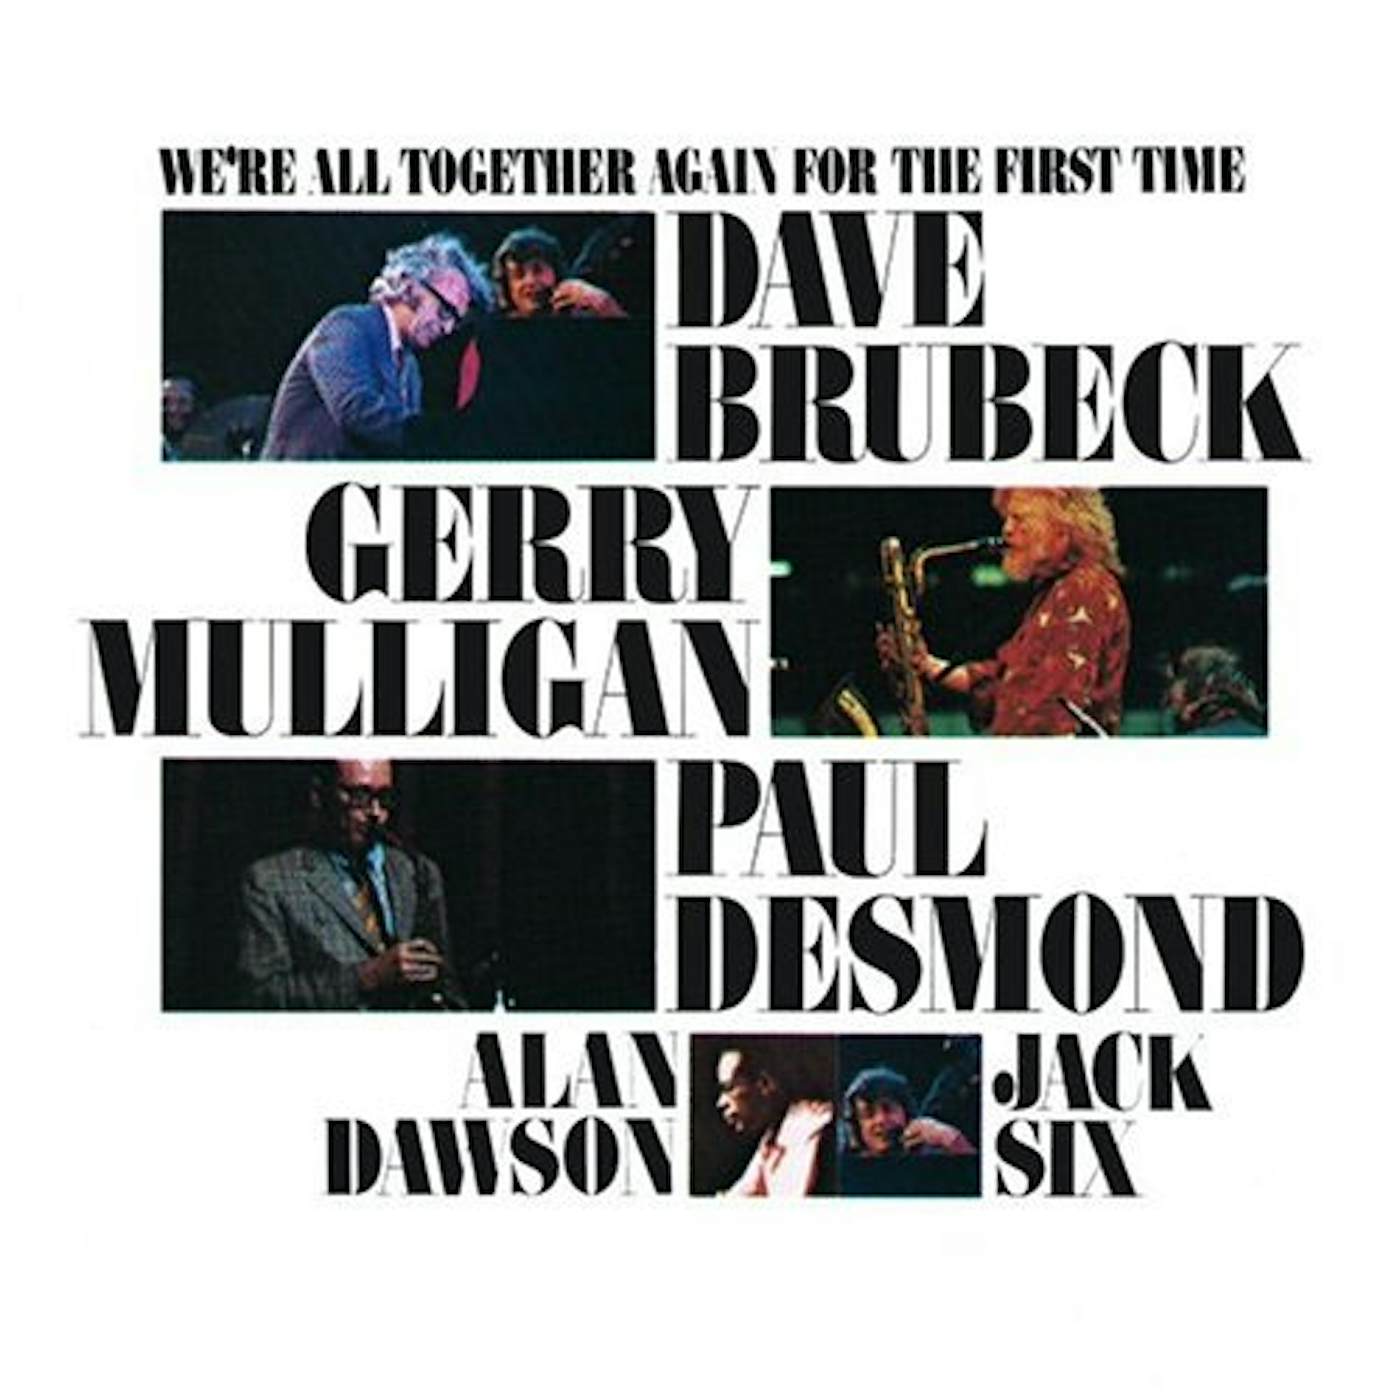 Dave Brubeck WE'RE ALL TOGETHER AGAIN FOR THE FIRST TIME CD